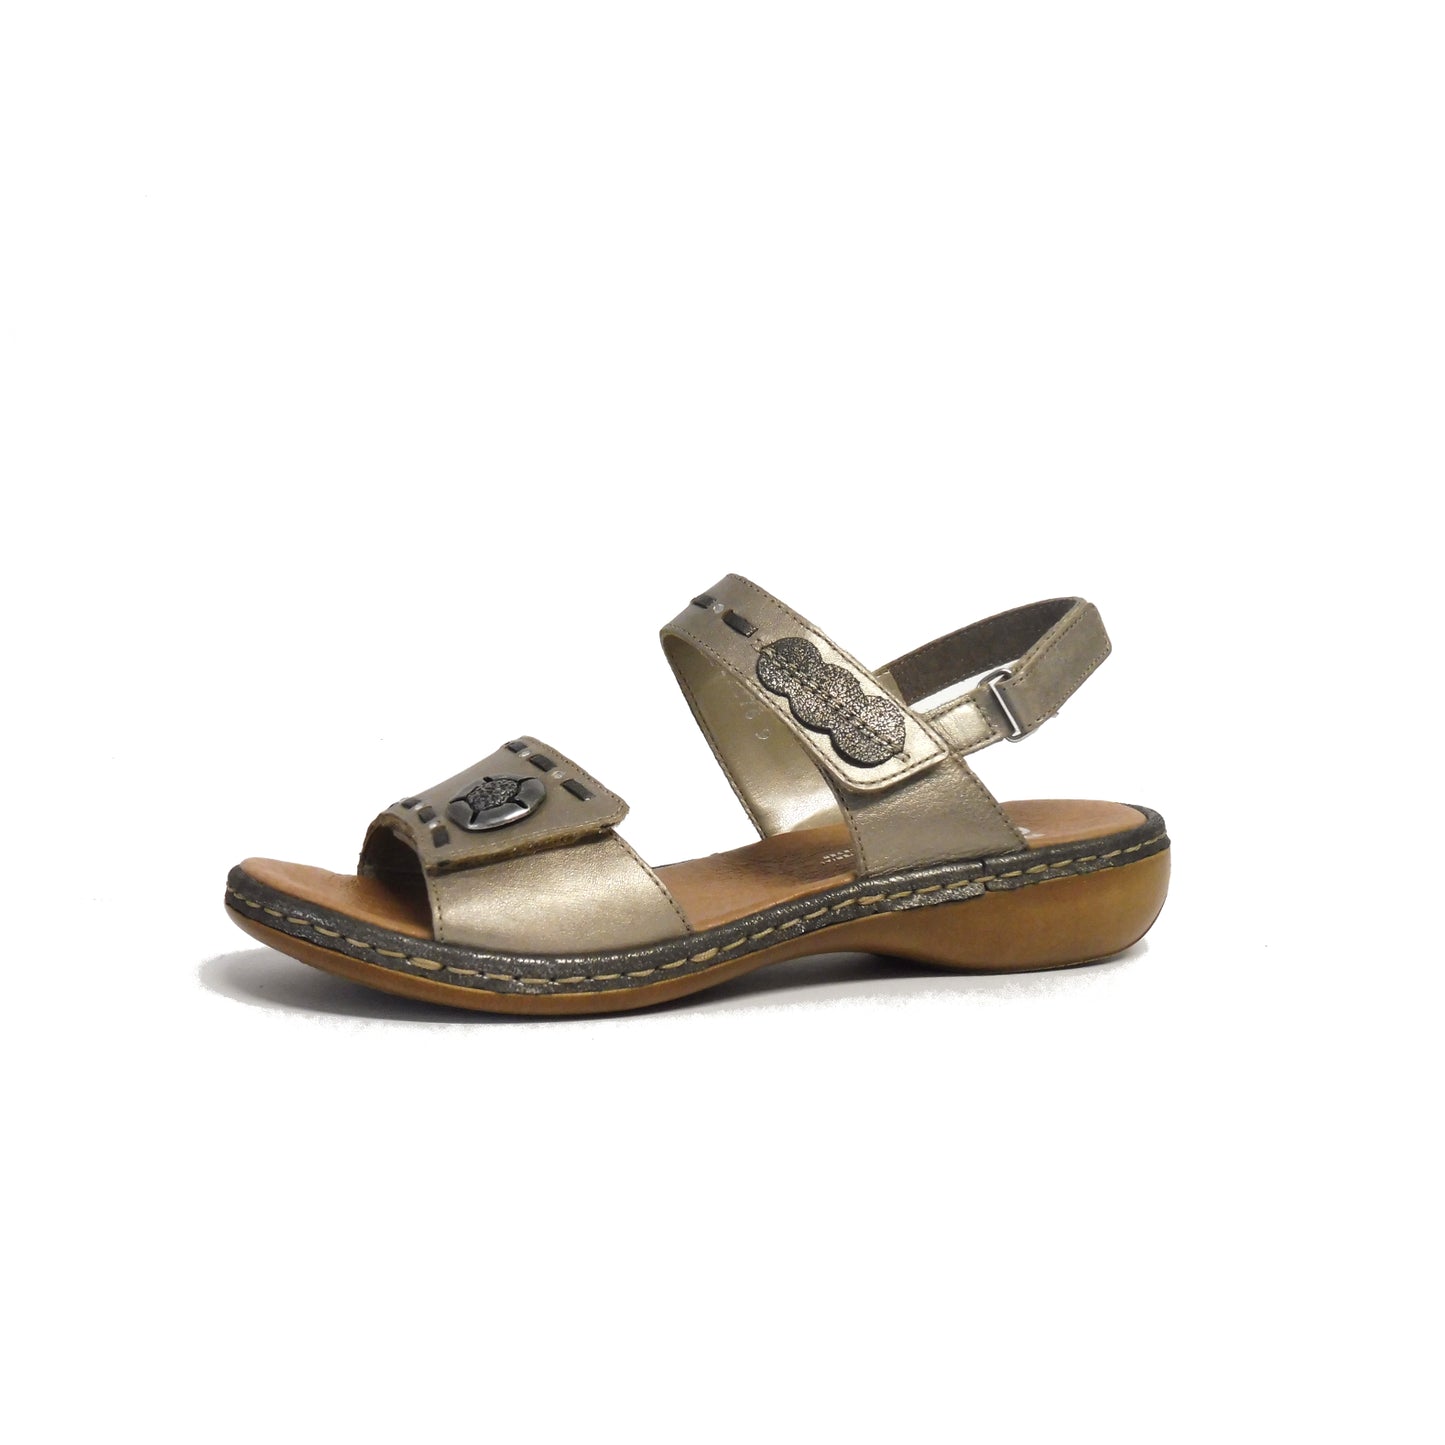 65972-90 Metallic (Size 40) - ONLINE ONLY